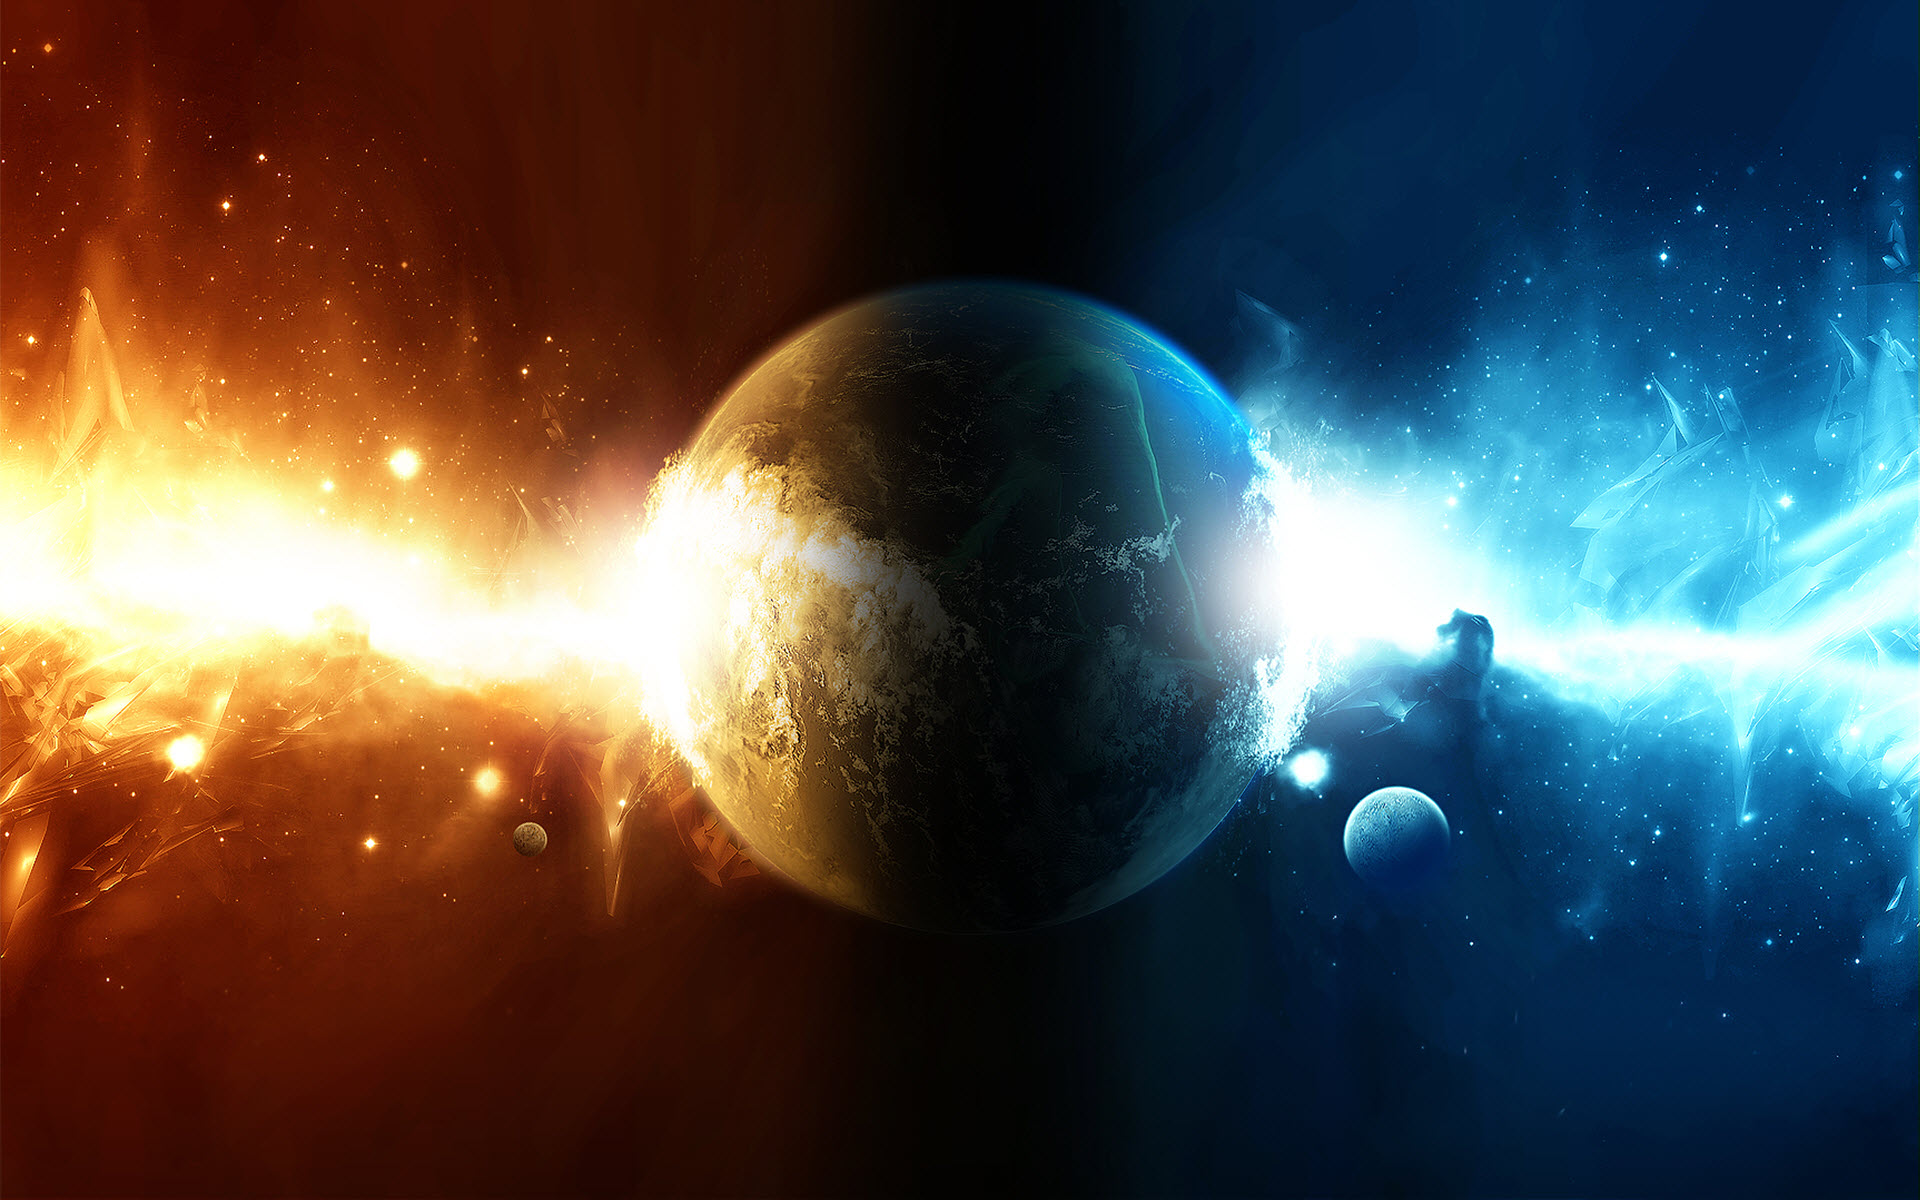 Two Sided Splash - High Resolution Space Wallpapers For Desktop - HD Wallpaper 